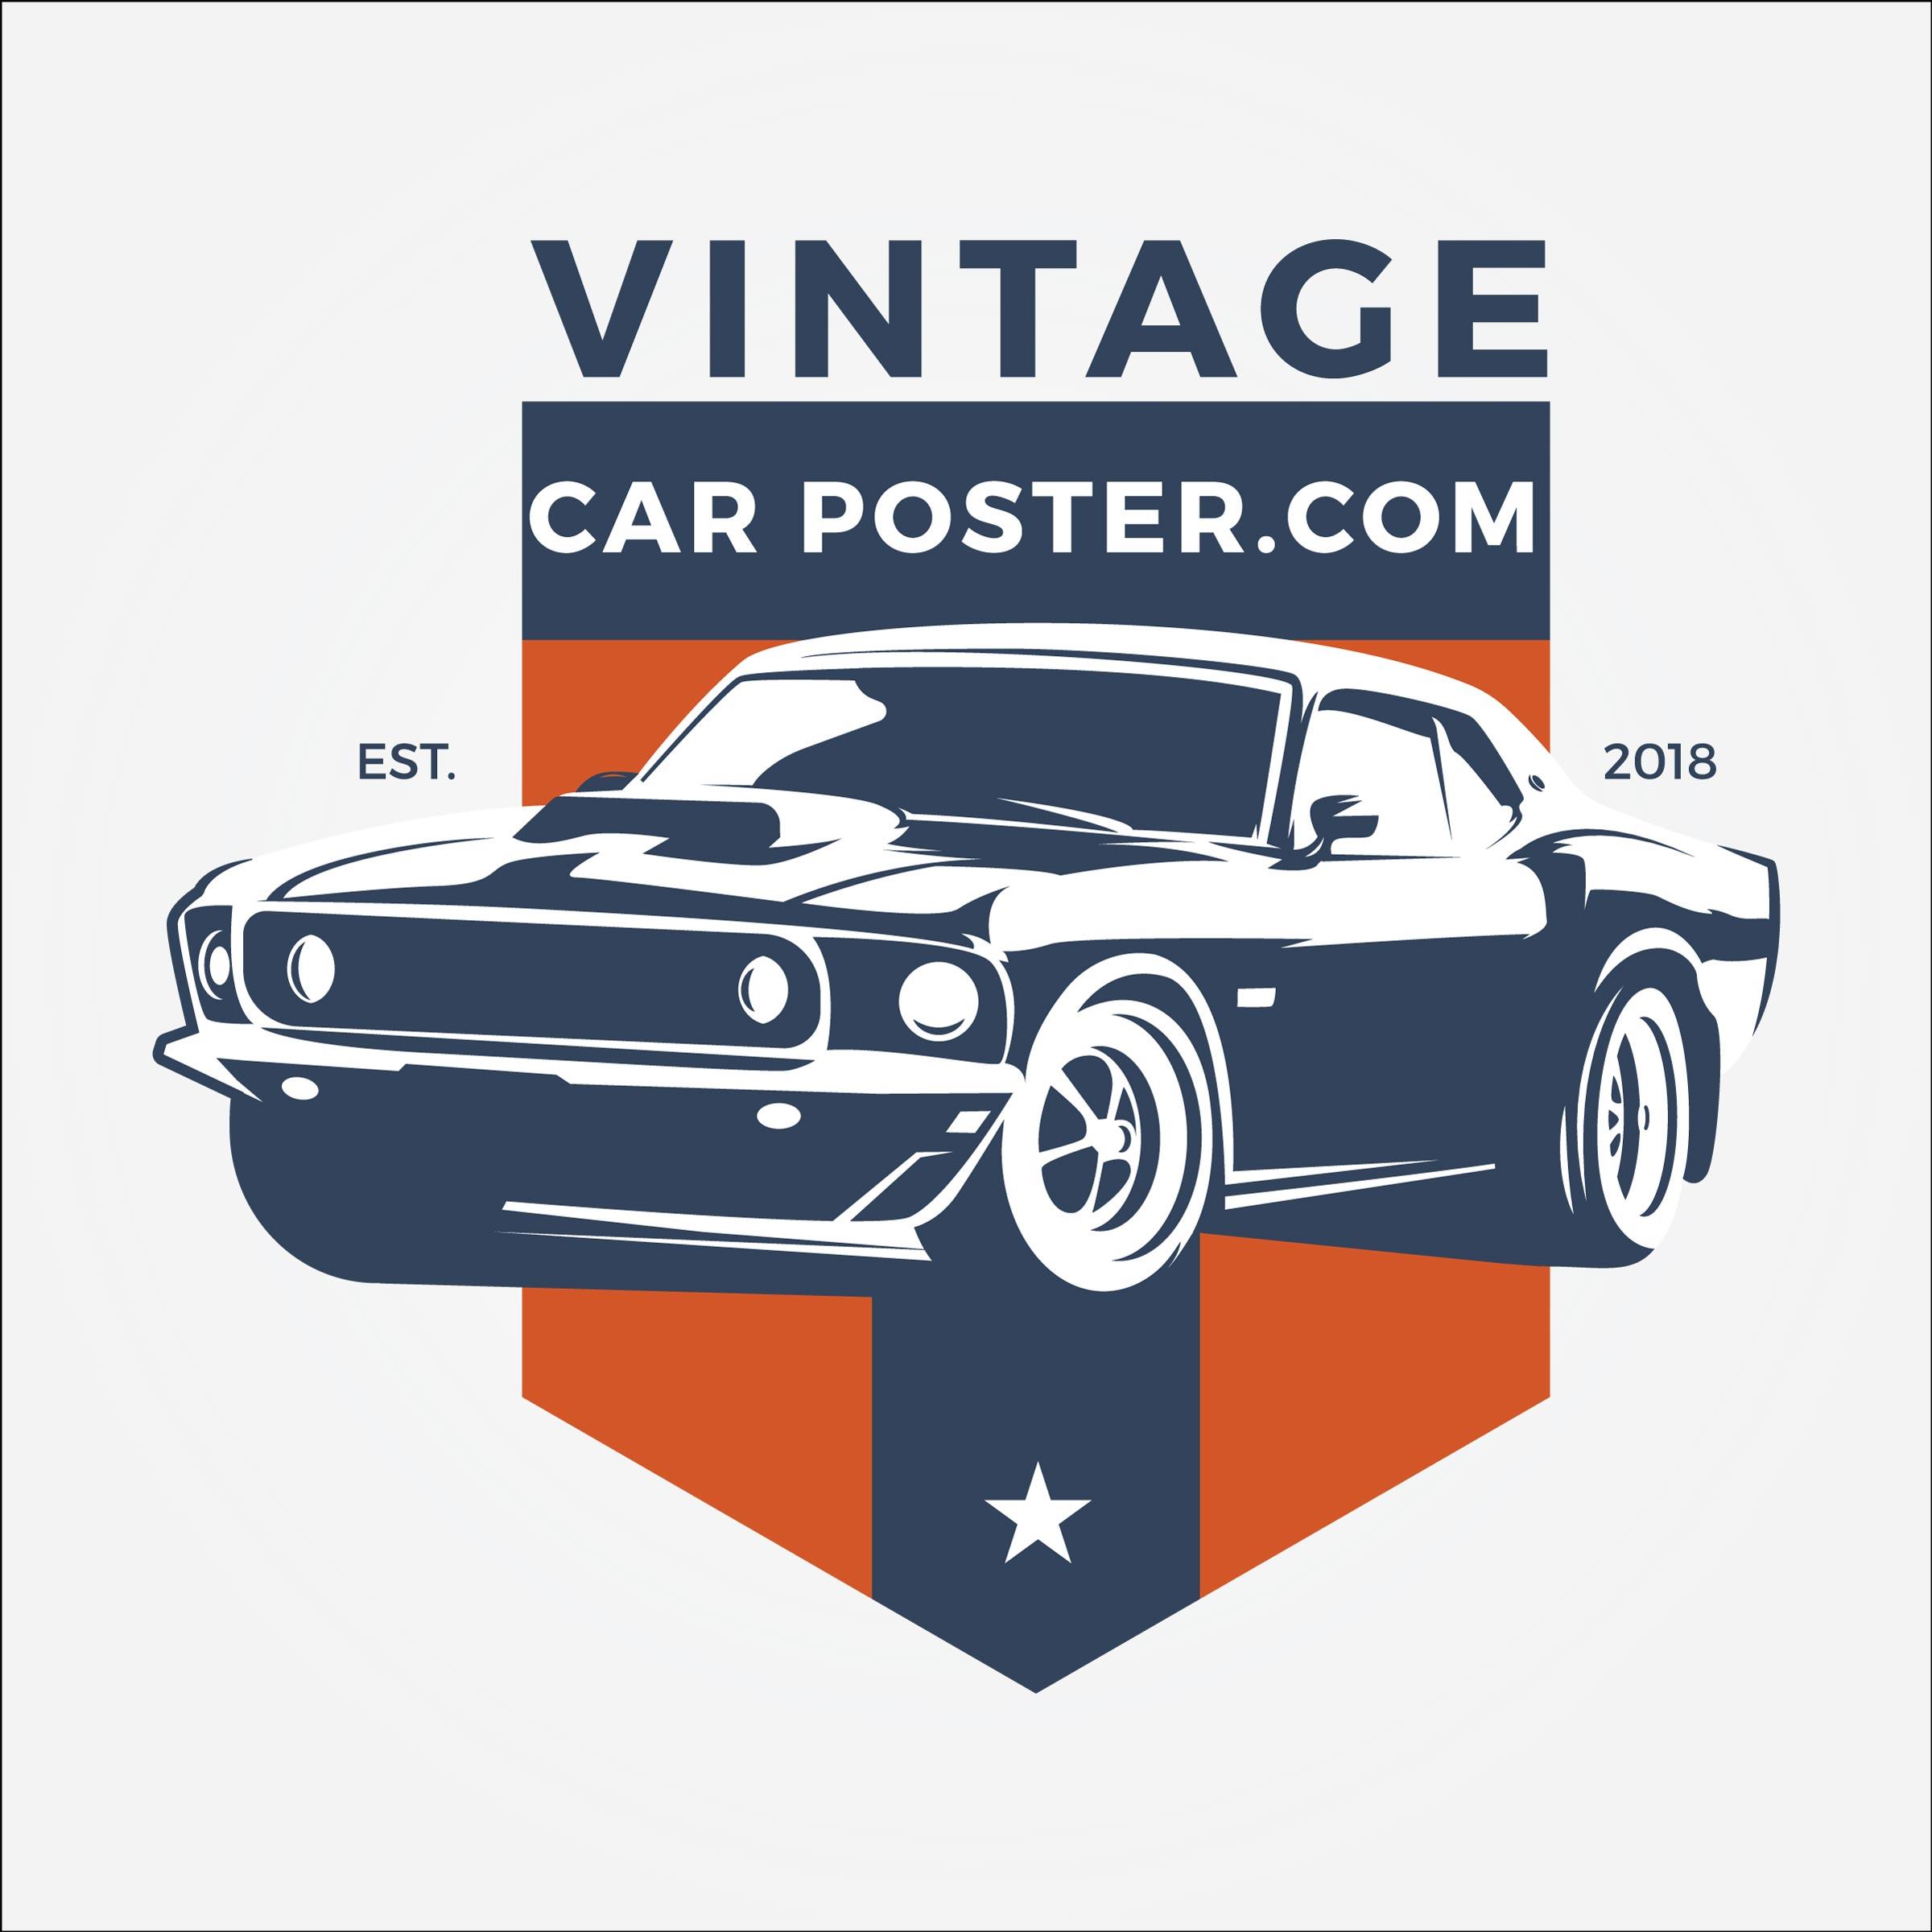 Vintage Auto Sales Logo - Branding for the Vintage Car Poster- with classic look